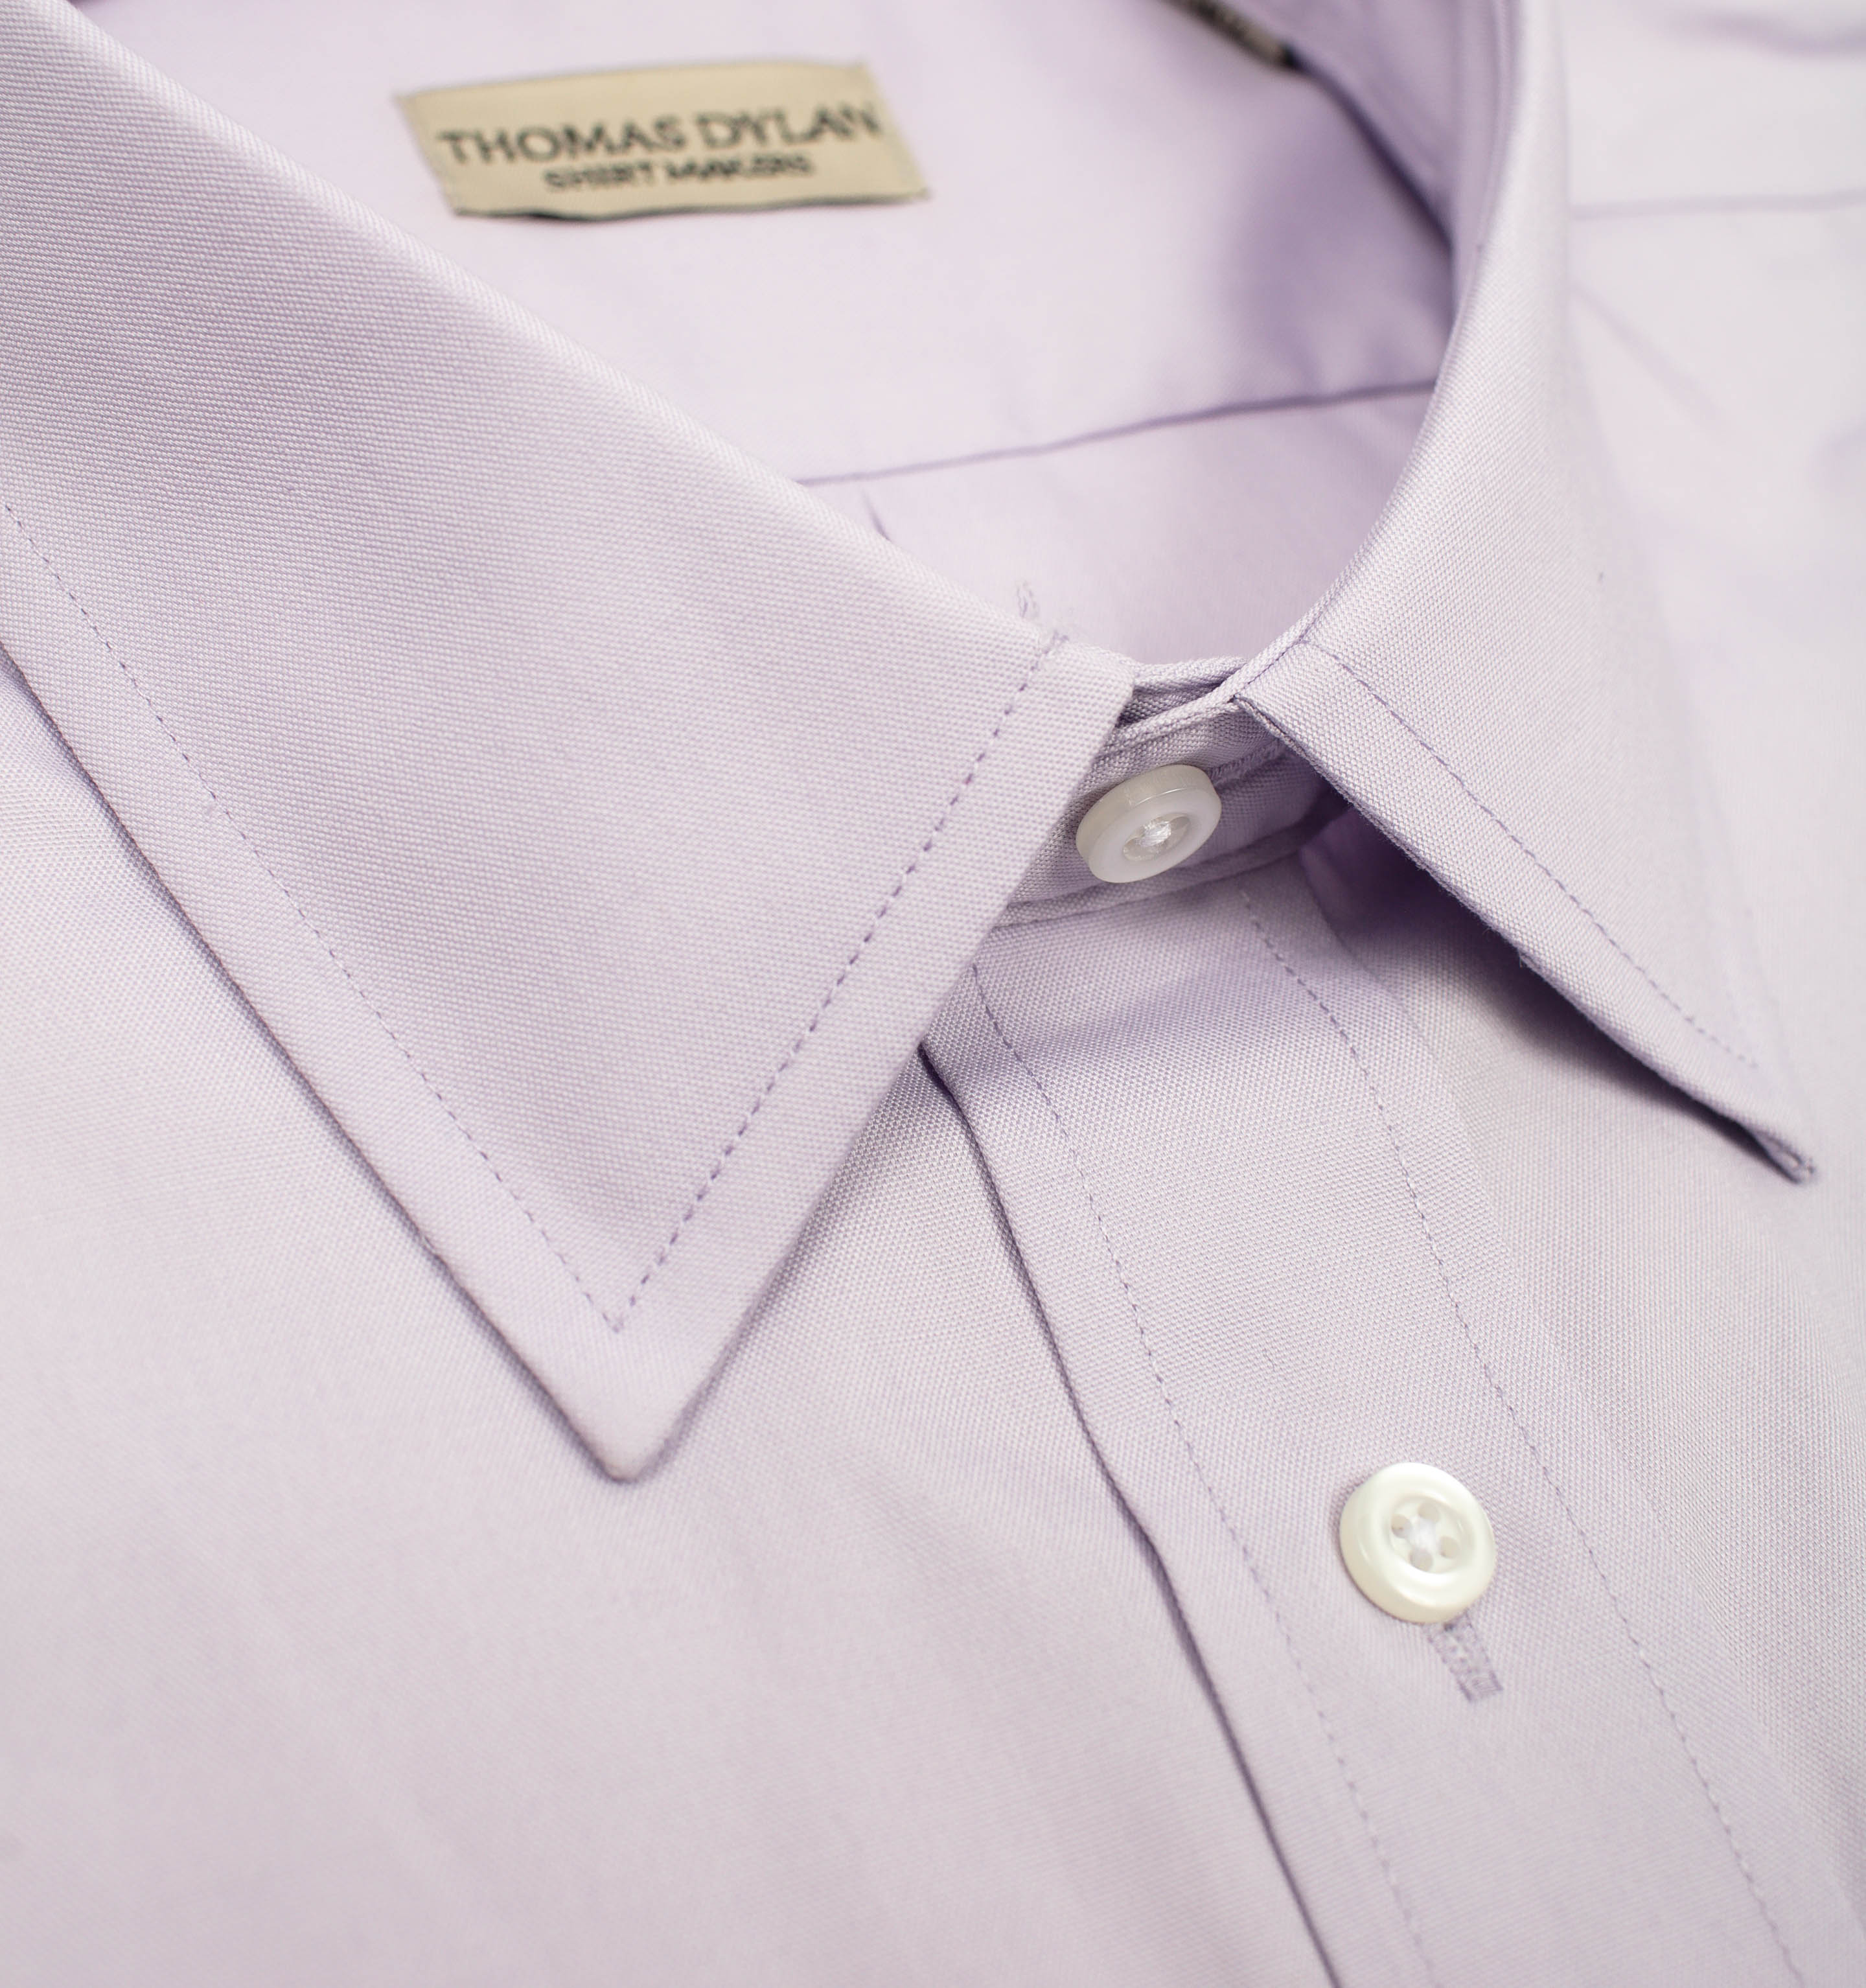 133 TF SC - Thomas Dylan Lavender Tailored Fit Spread Collar